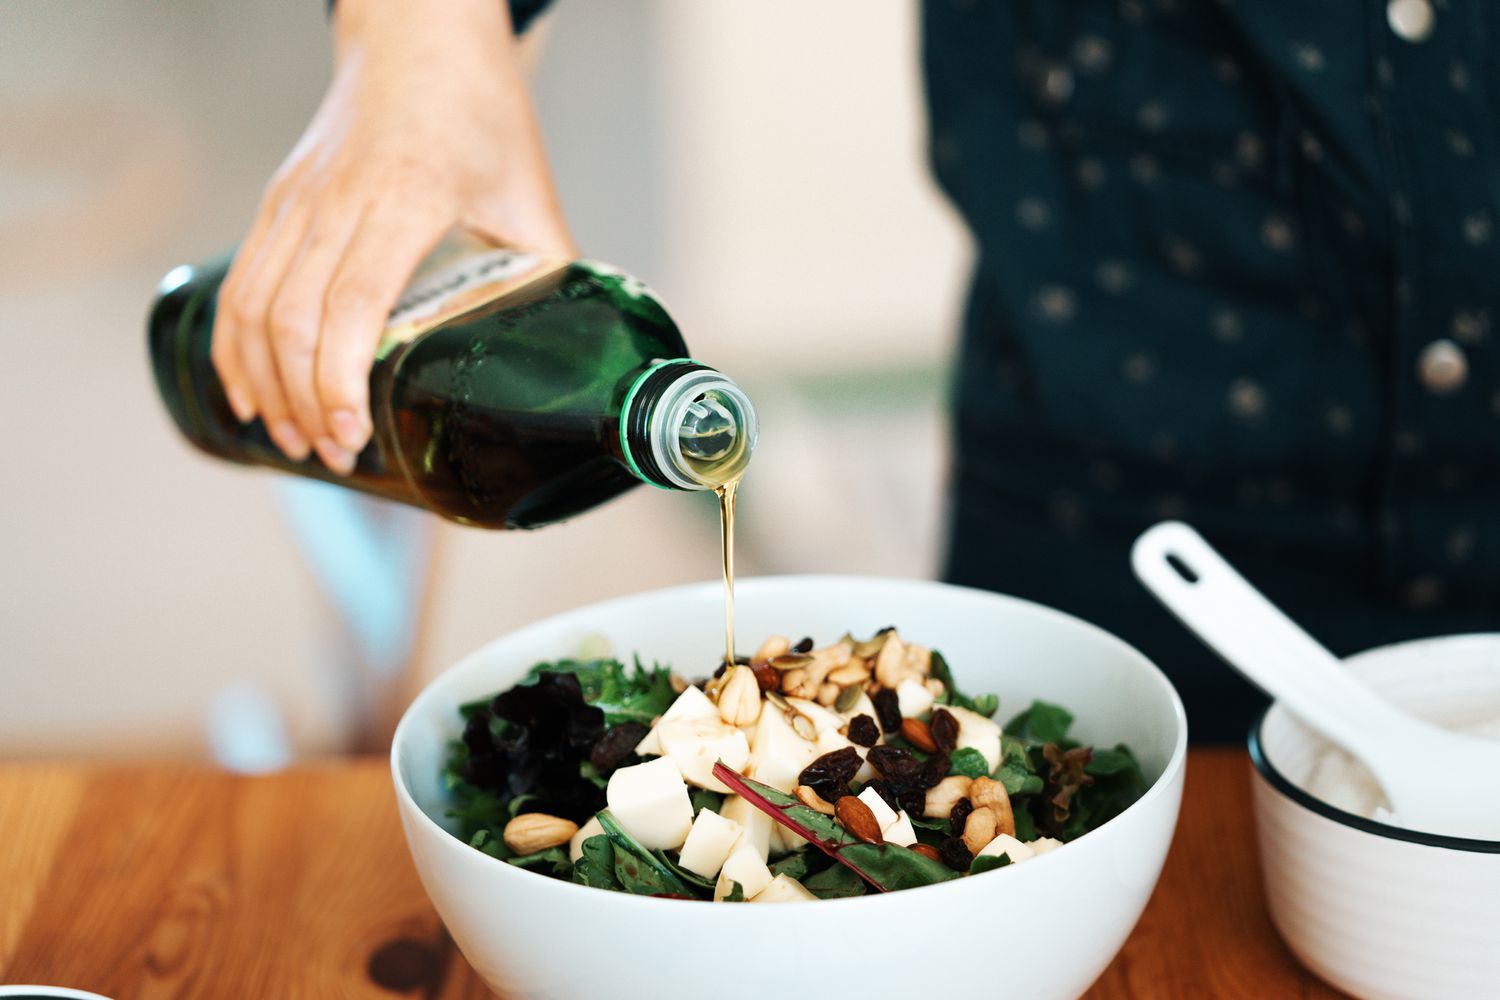 Fresh green salad with olive oil, mozzarella, mixed nuts, and dry fruits